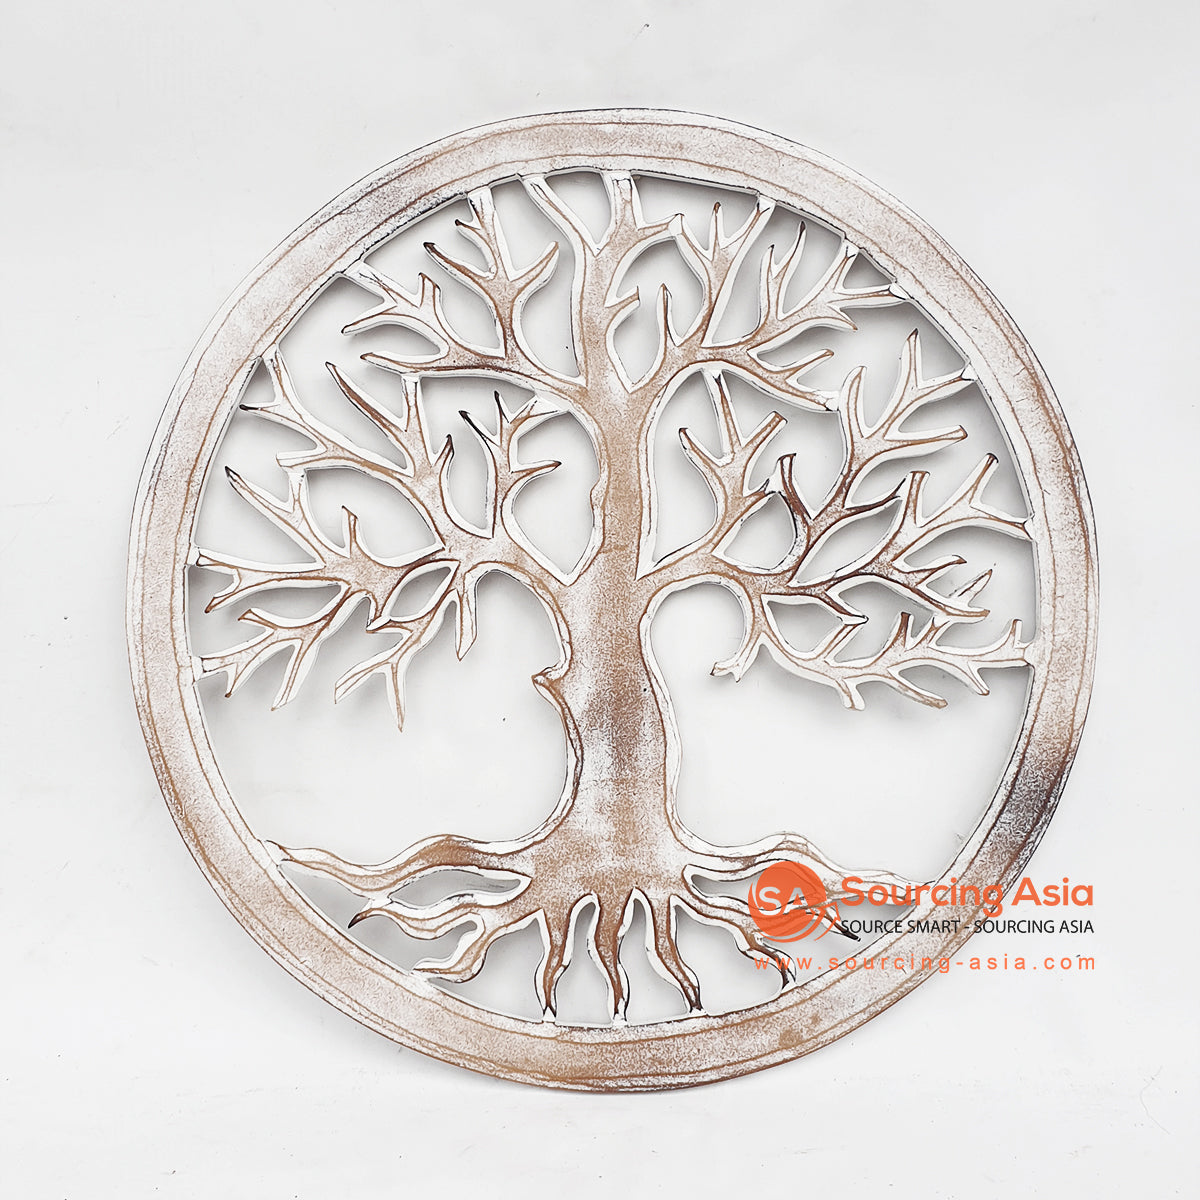 LUHC013 WHITE WASH WOODEN ROUND "TREE OF LIFE" CARVED PANEL